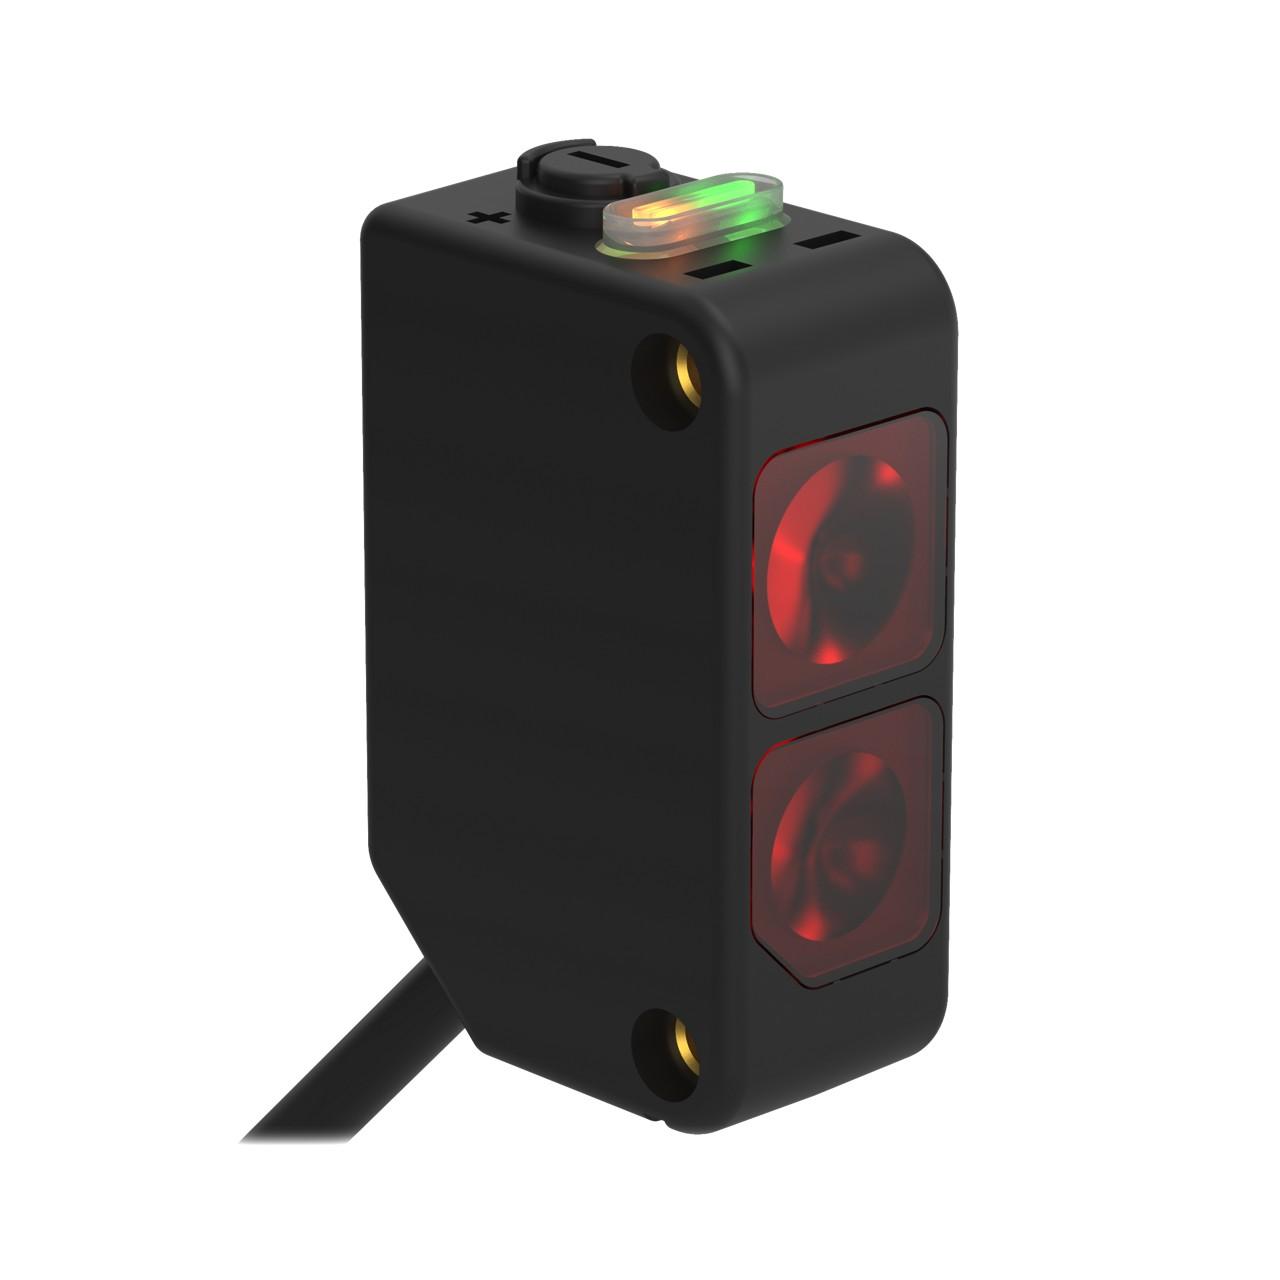 Banner Q20ND Photo-electric sensor with diffuse mode - Banner Engineering (WORLD-BEAM series - Q20 series) - Part #77759 - Sensing range 250mm - Visible red light (624nm) - 1 x digital output (NPN transistor) (Light-ON or Dark-ON operation) - Supply voltage 10Vdc-30Vd